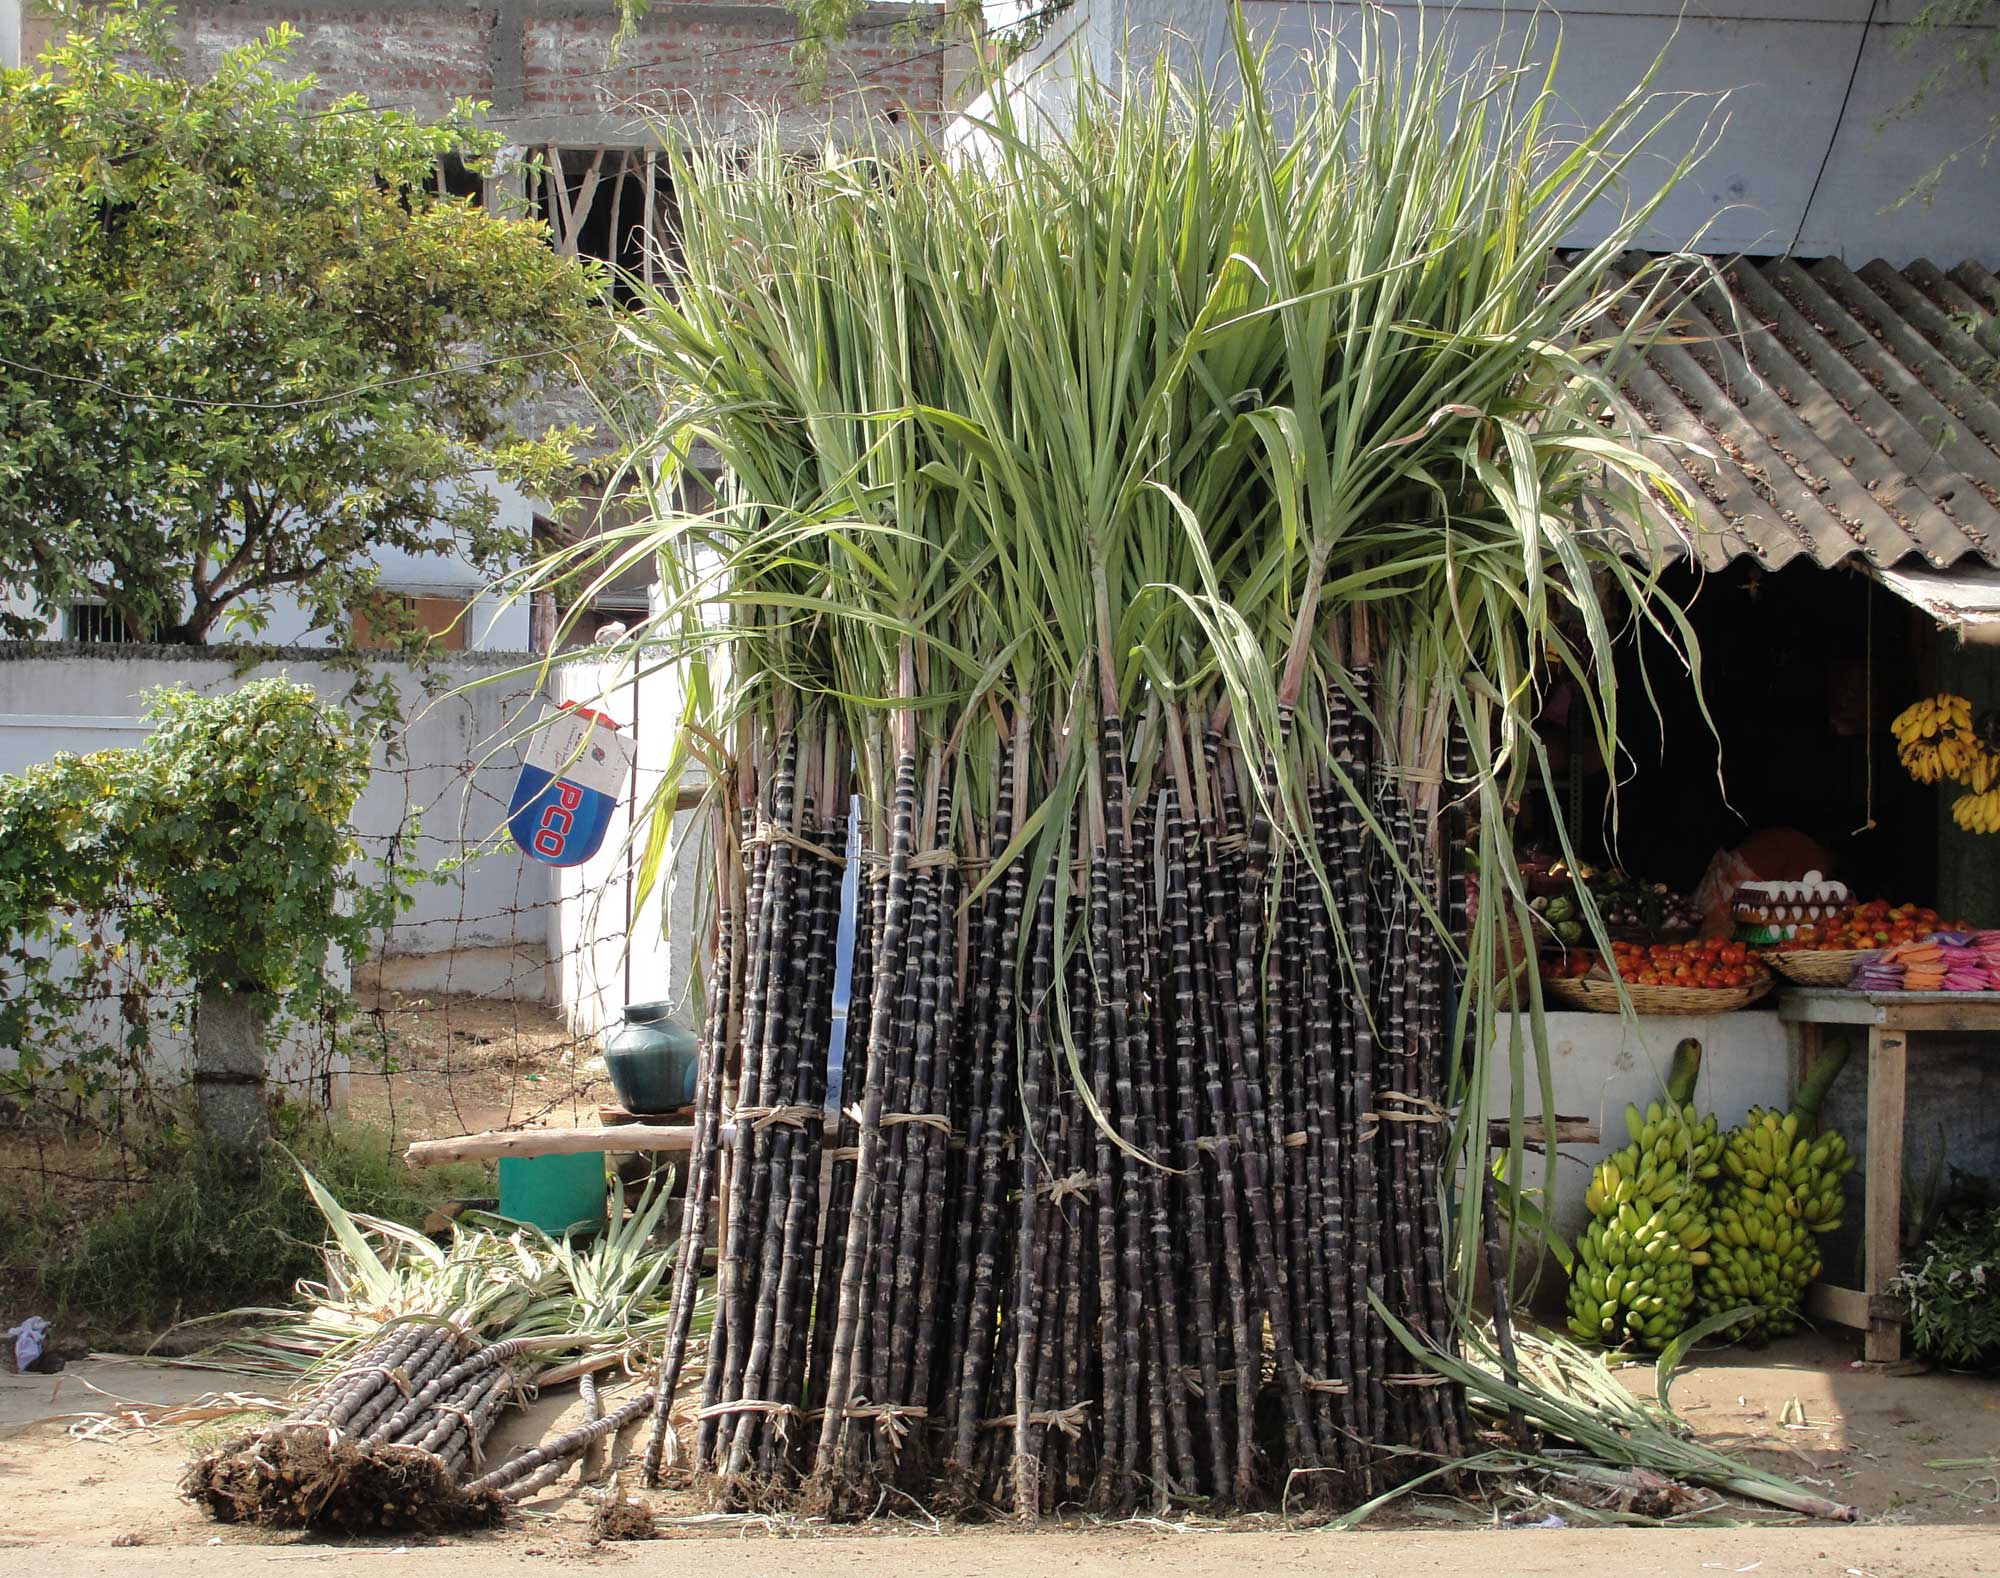 Photograph of bundles of sugar cane near a market stall. The photo shows multiple bundles of sugarcane standing upright, with a few bundles laying the on the ground to the left. The sugarcane stalks are purple with regularly spaced with bands. Elongated leaves are born near the tops of the sugarcane stems.